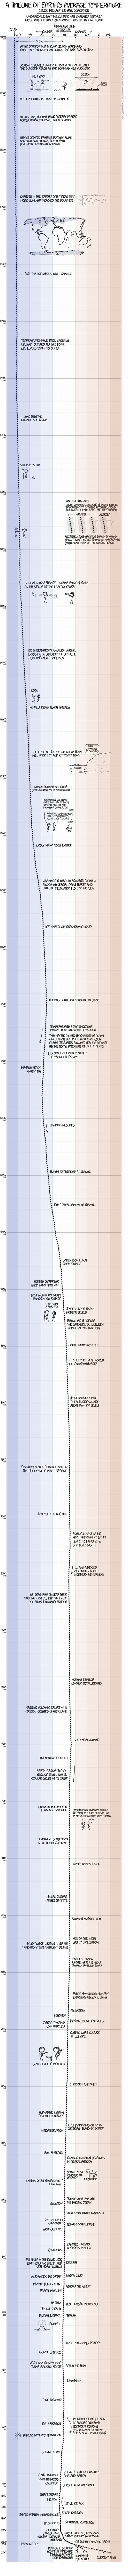 earth_temperature_timeline_2x.png